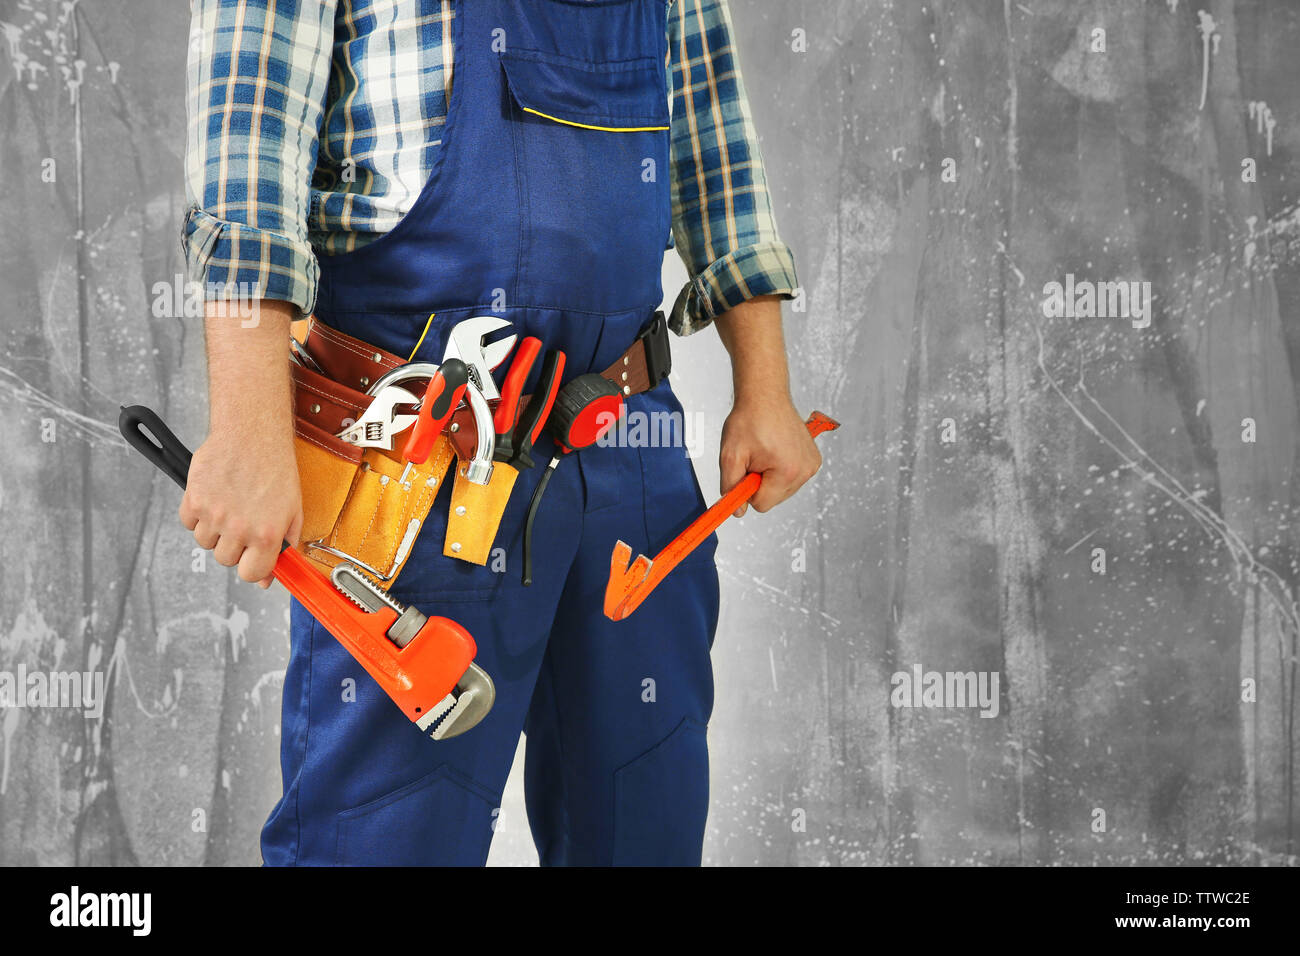 Plumber with tools against grunge background, close up view Stock Photo